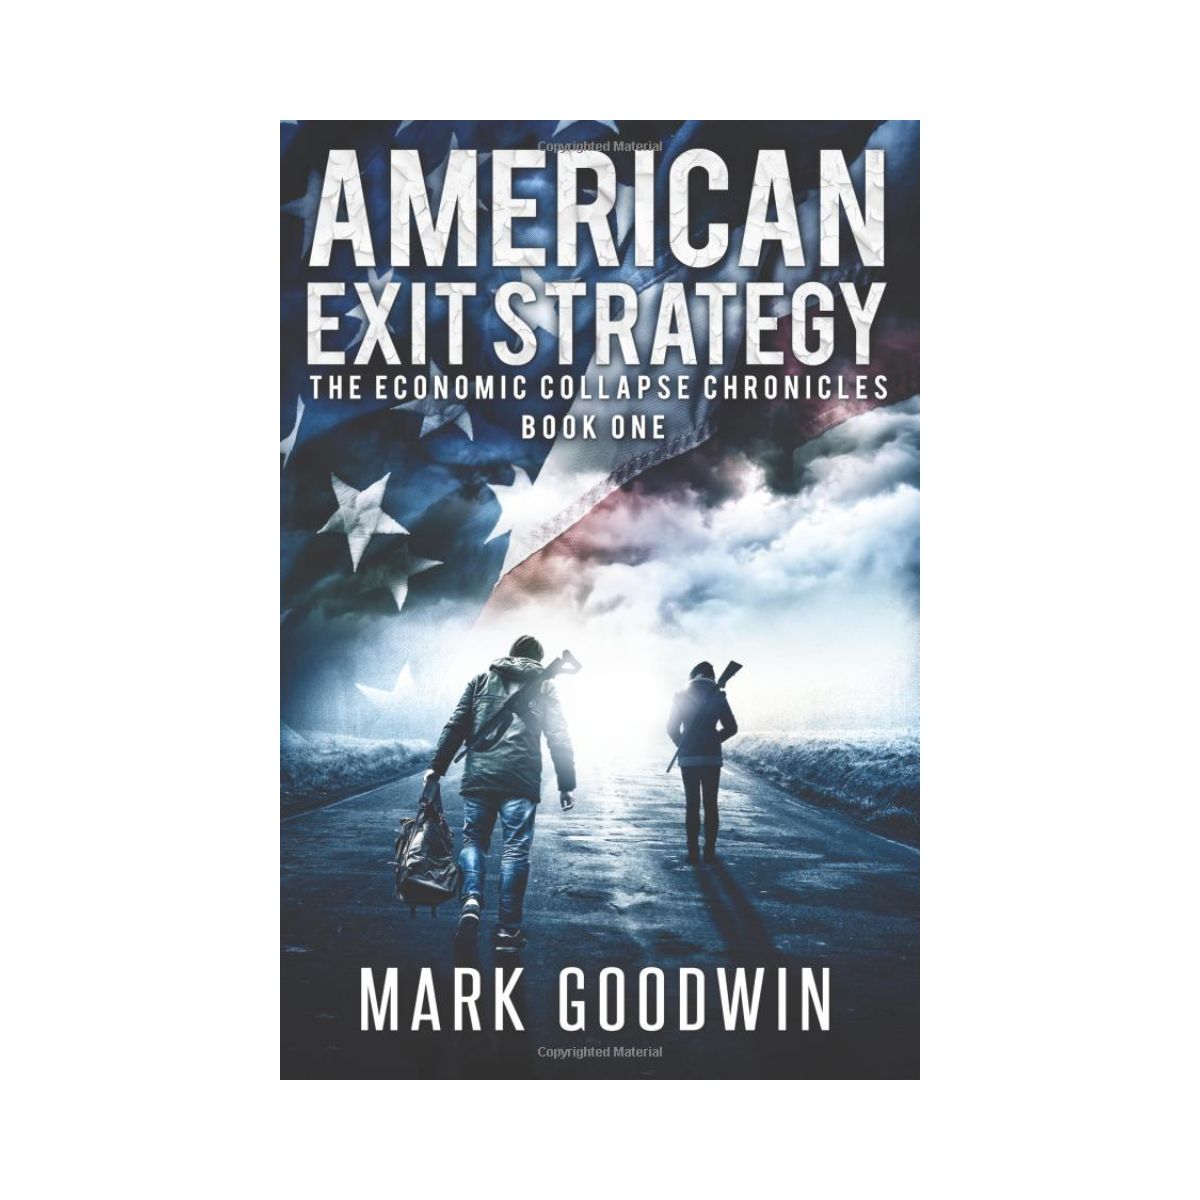 American Exit Strategy by Mark Goodwin